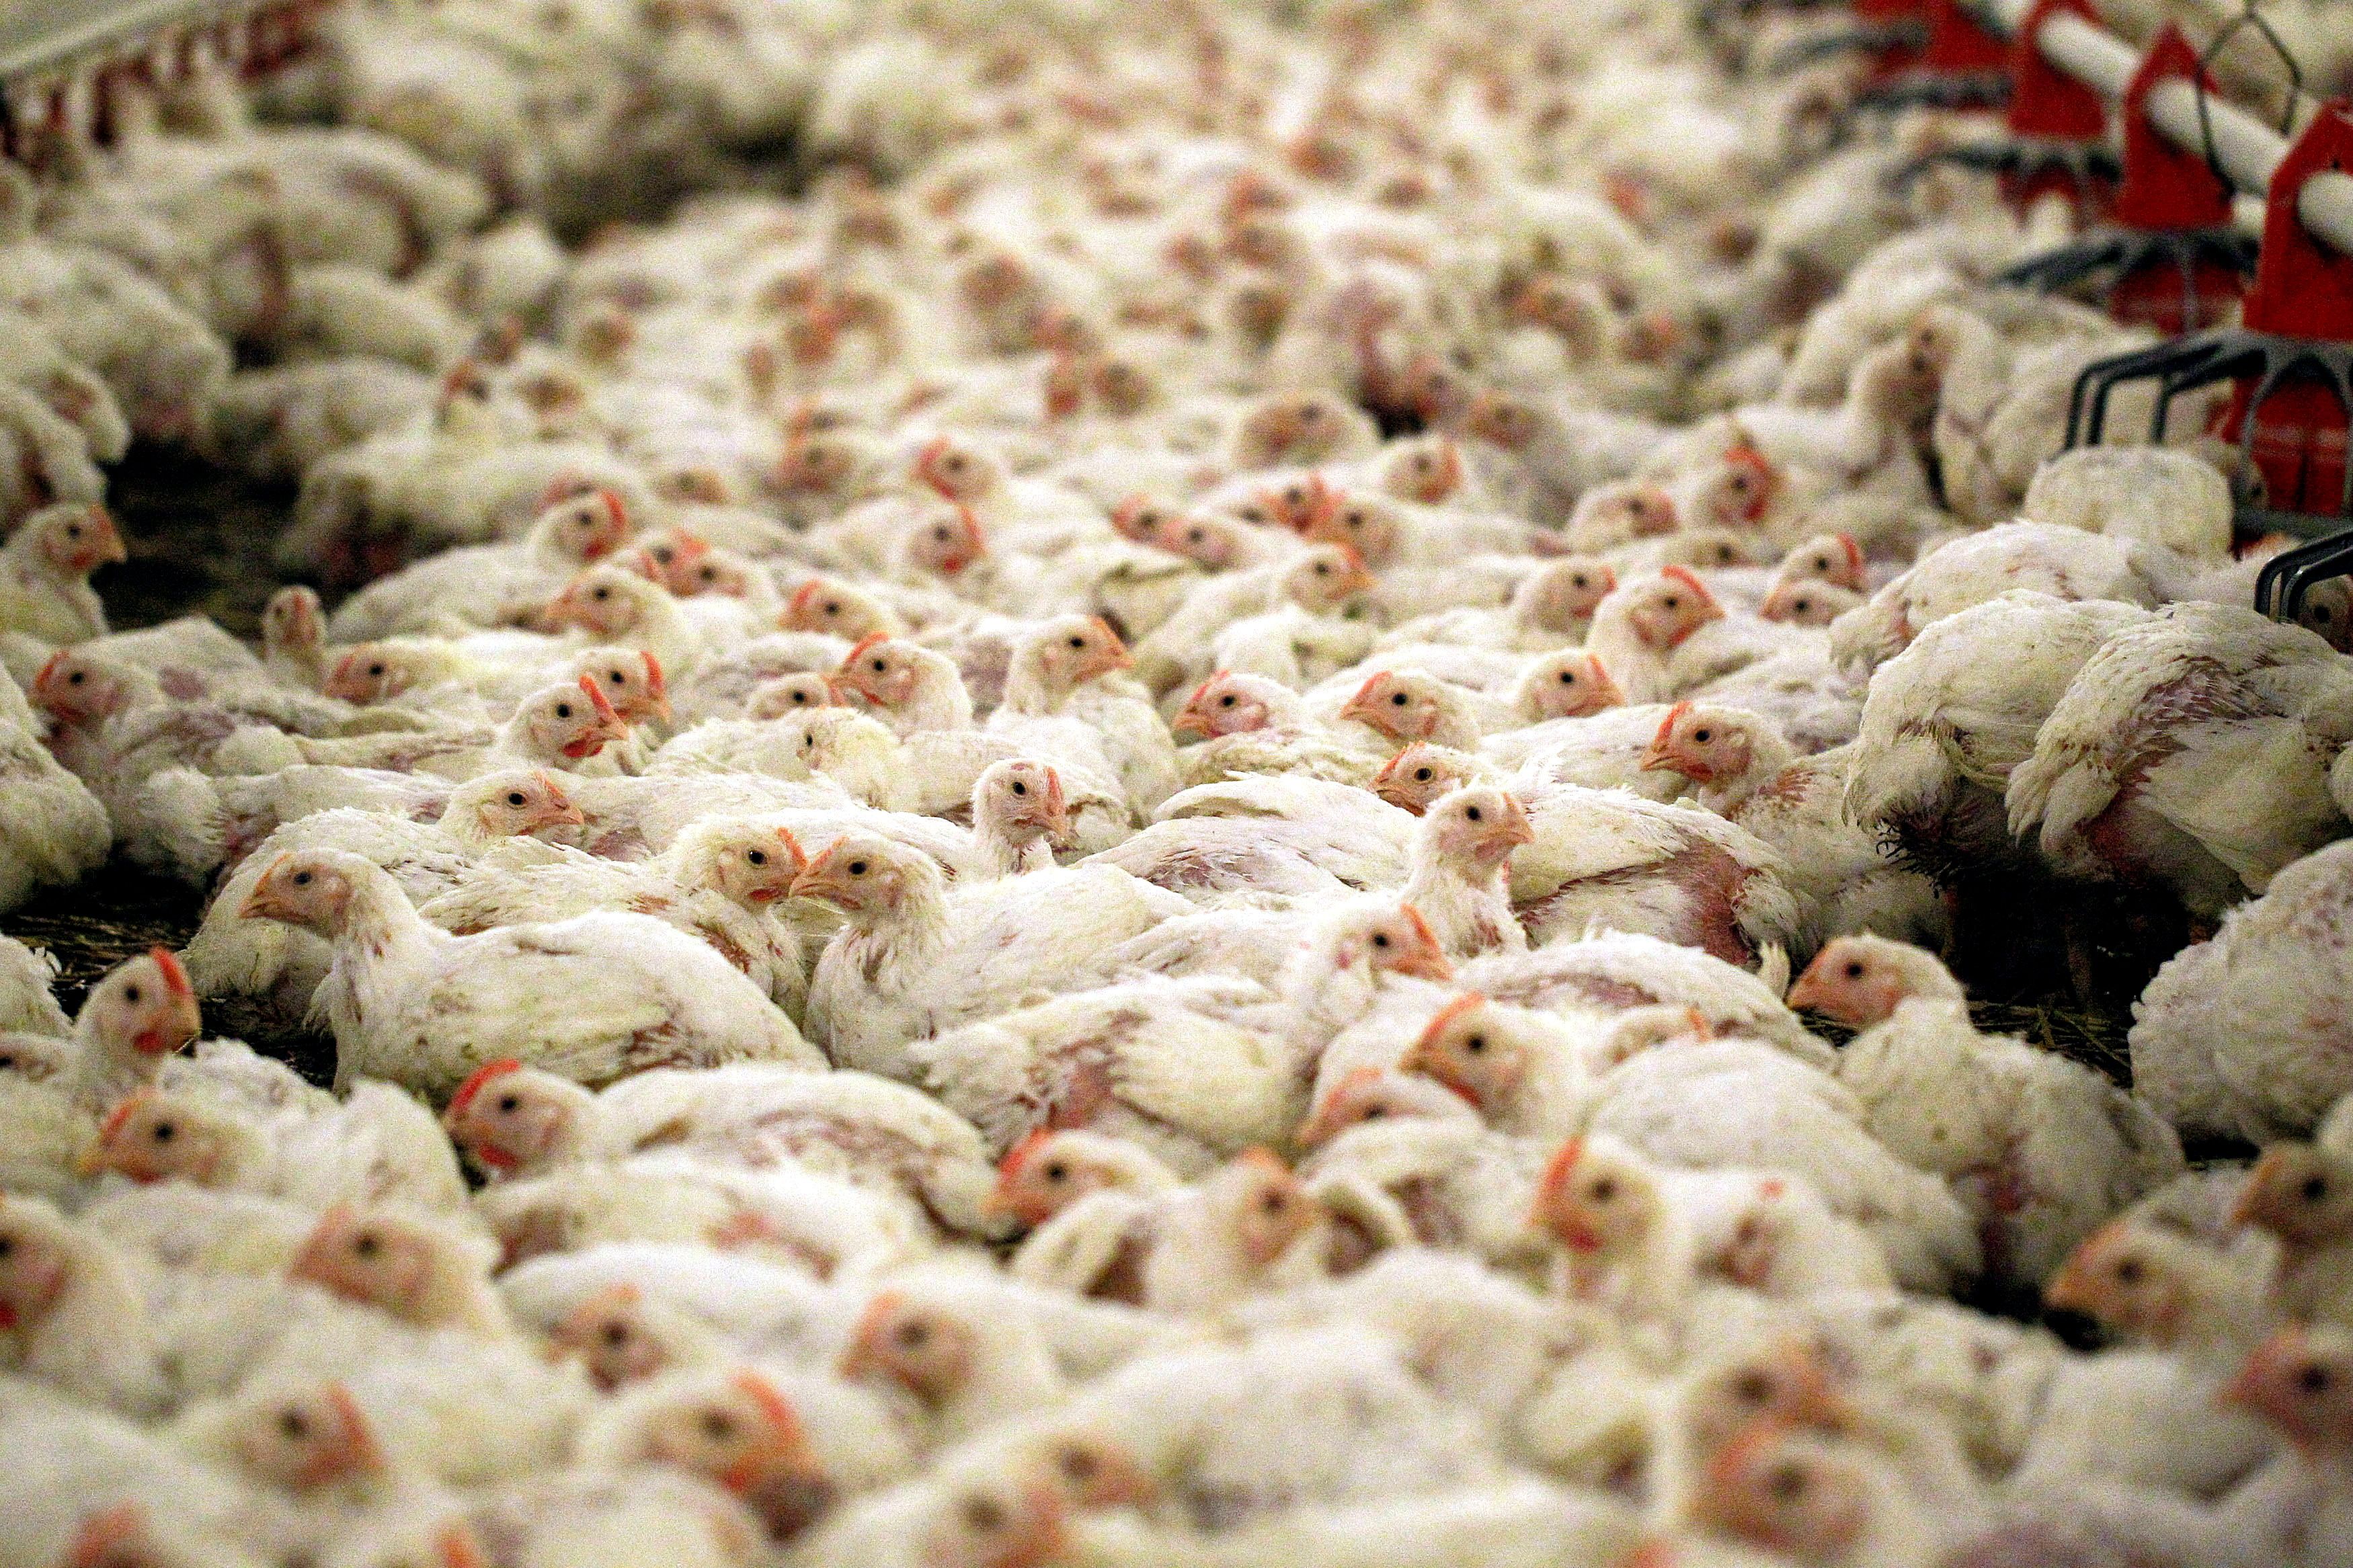 Chickens sit in their pen at Zbigniew Sochodzki poultry farm in the village of Olszewo